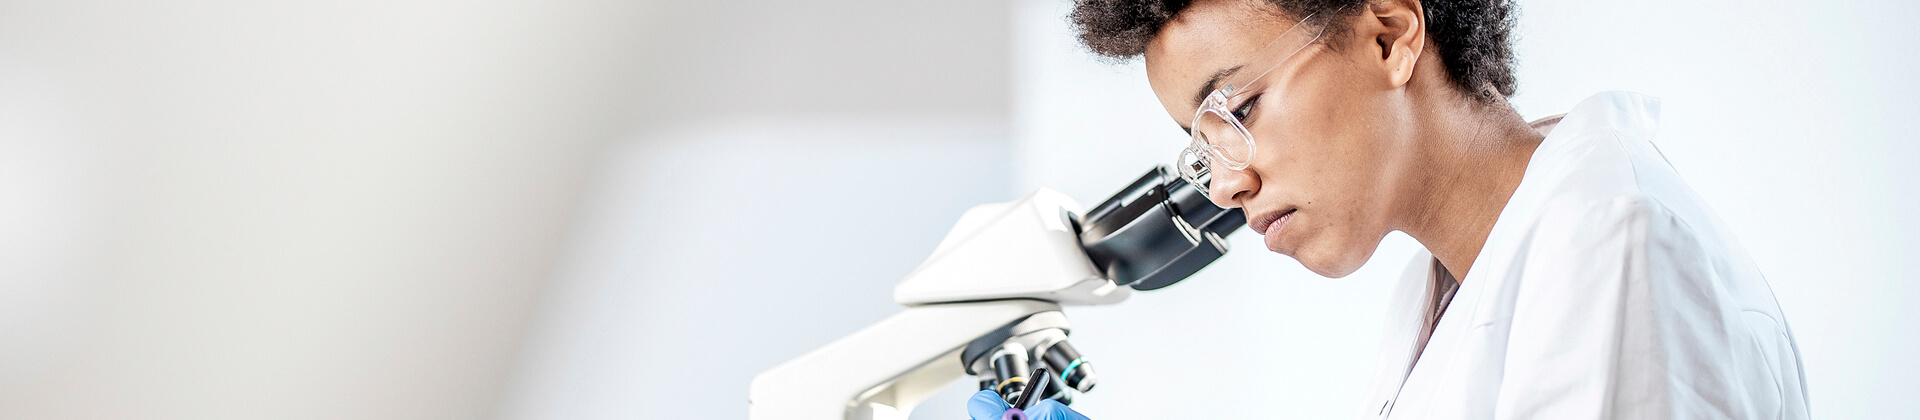 A woman with short, coiled hair and glasses looks down into a microscope for the Bachelor of Science in Clinical Laboratory Science Program Page